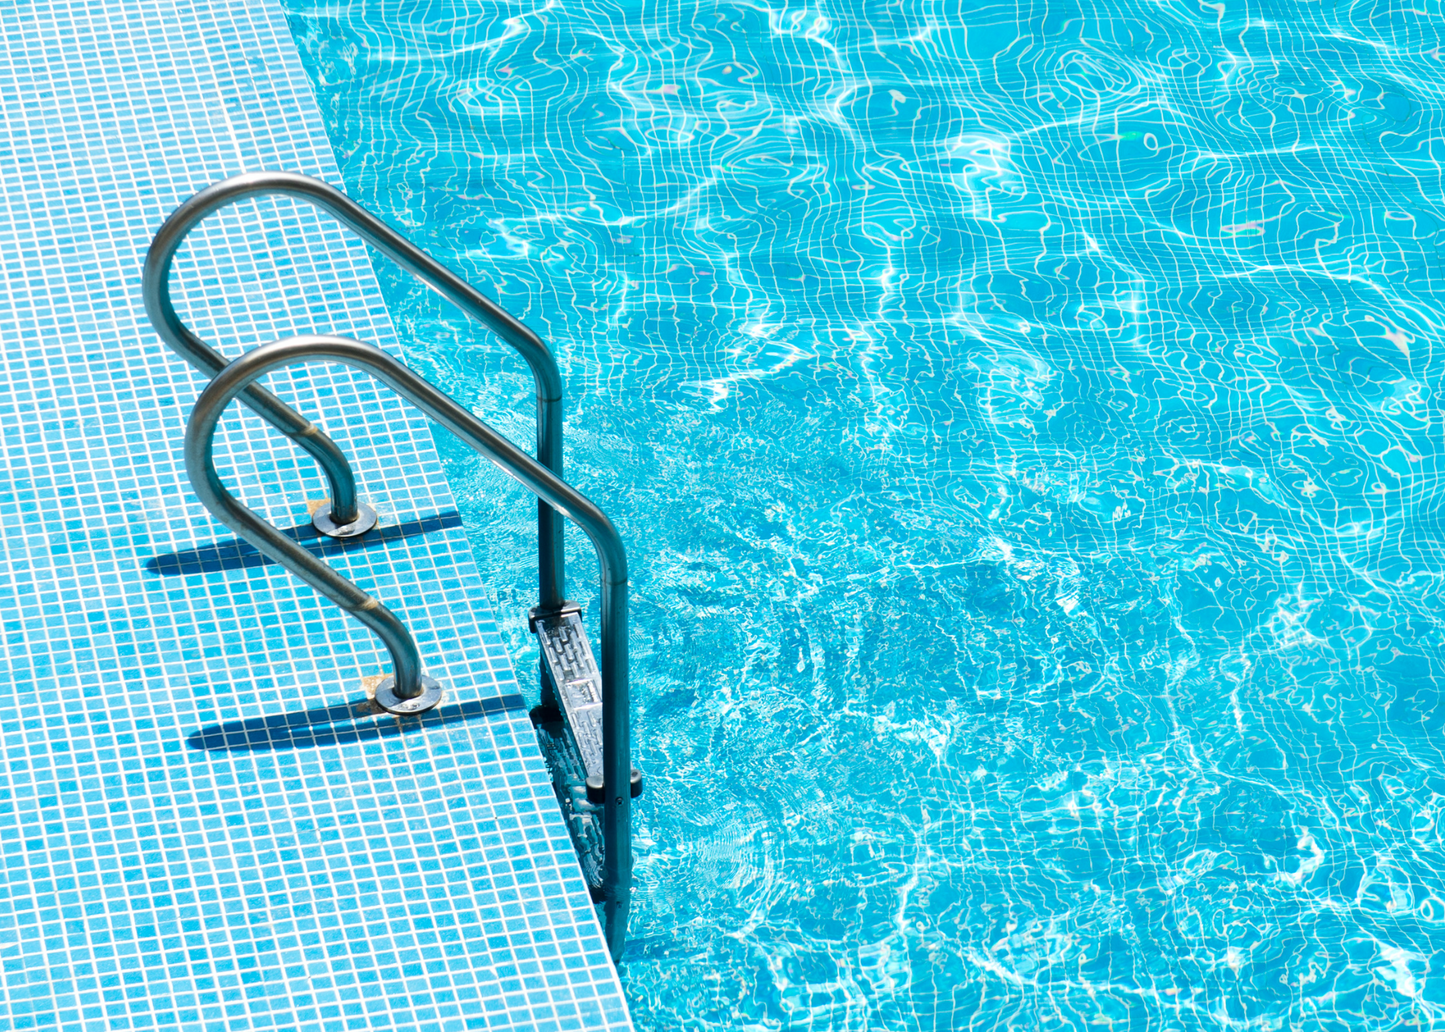 10 WAYS TO KEEP YOUR SKIN & HAIR HEALTHY WHILE IN THE POOL